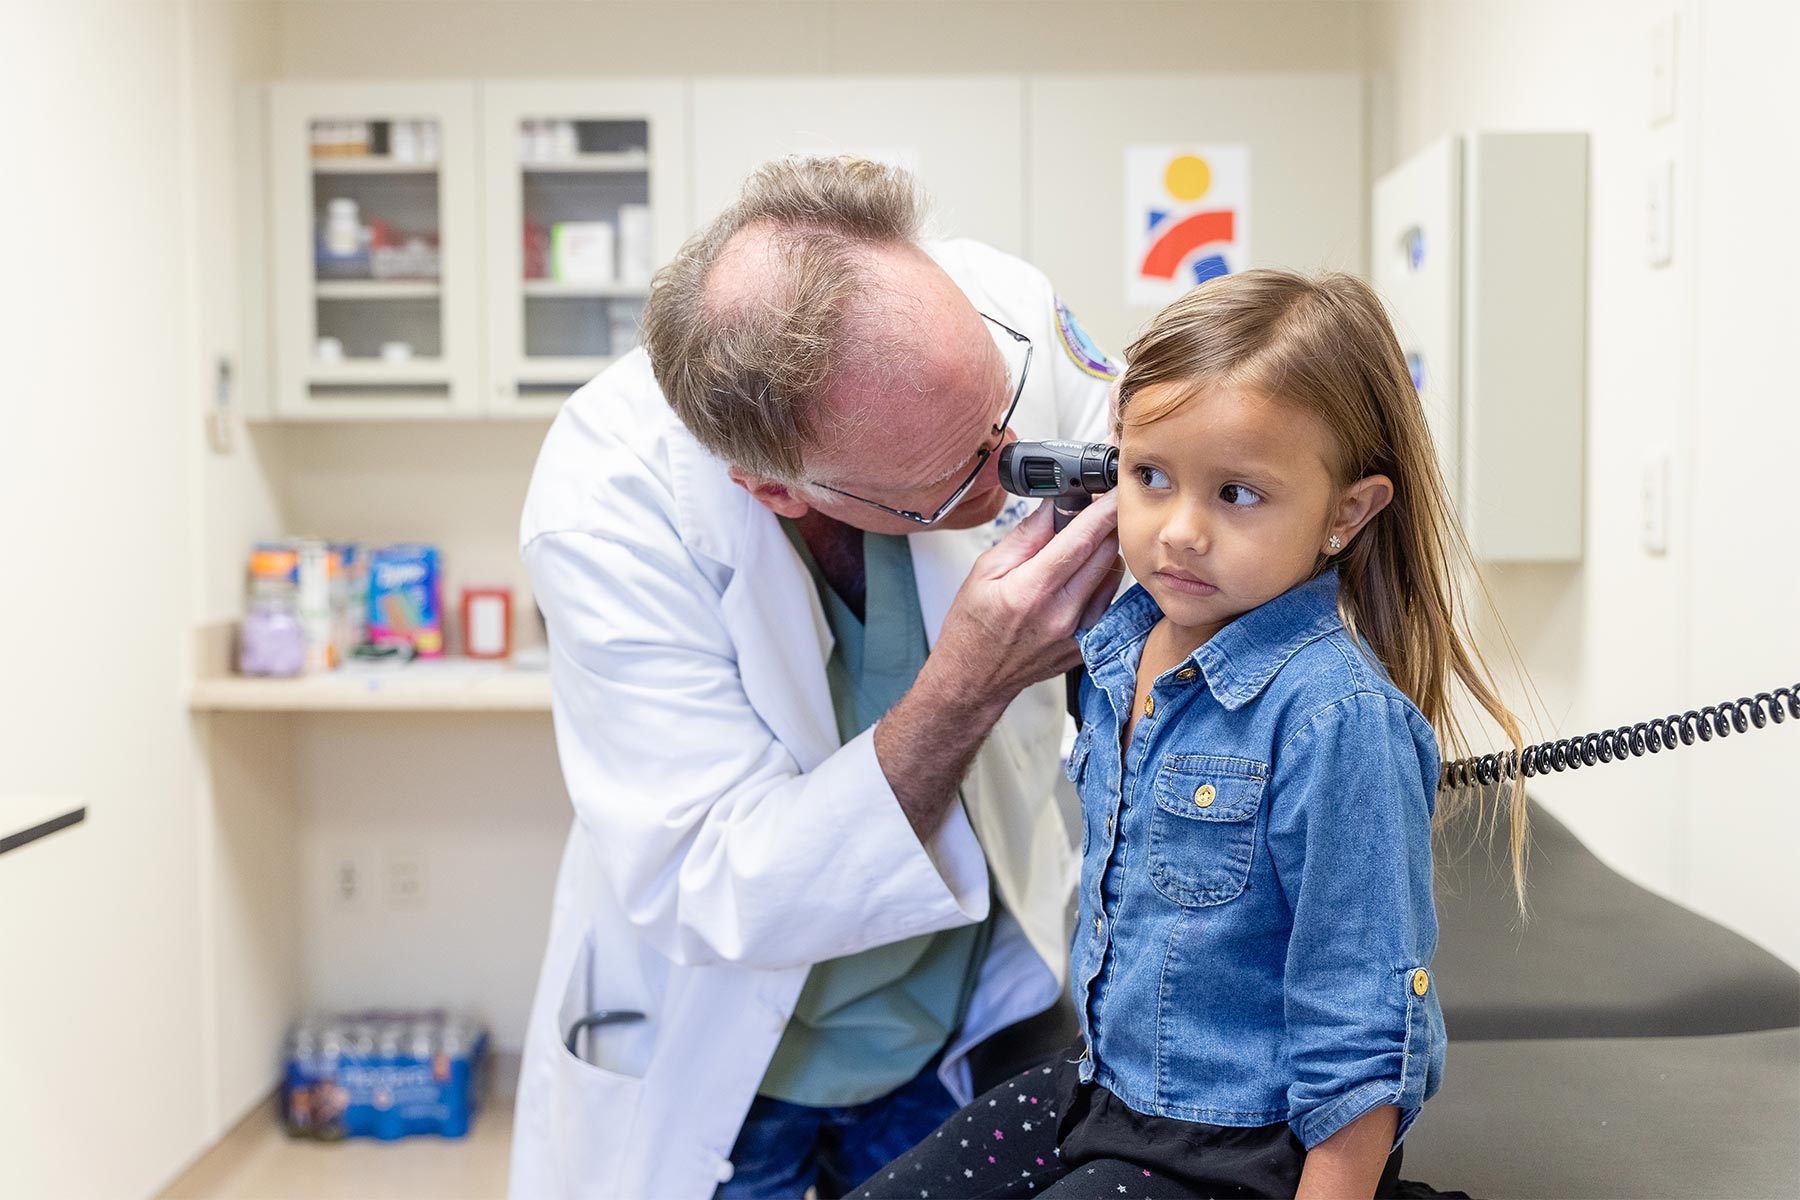 Volunteer Dr. William Liston examines a young patient at the Americares clinic in Panama City, Fla. Photo by William Vazquez/Americares. 